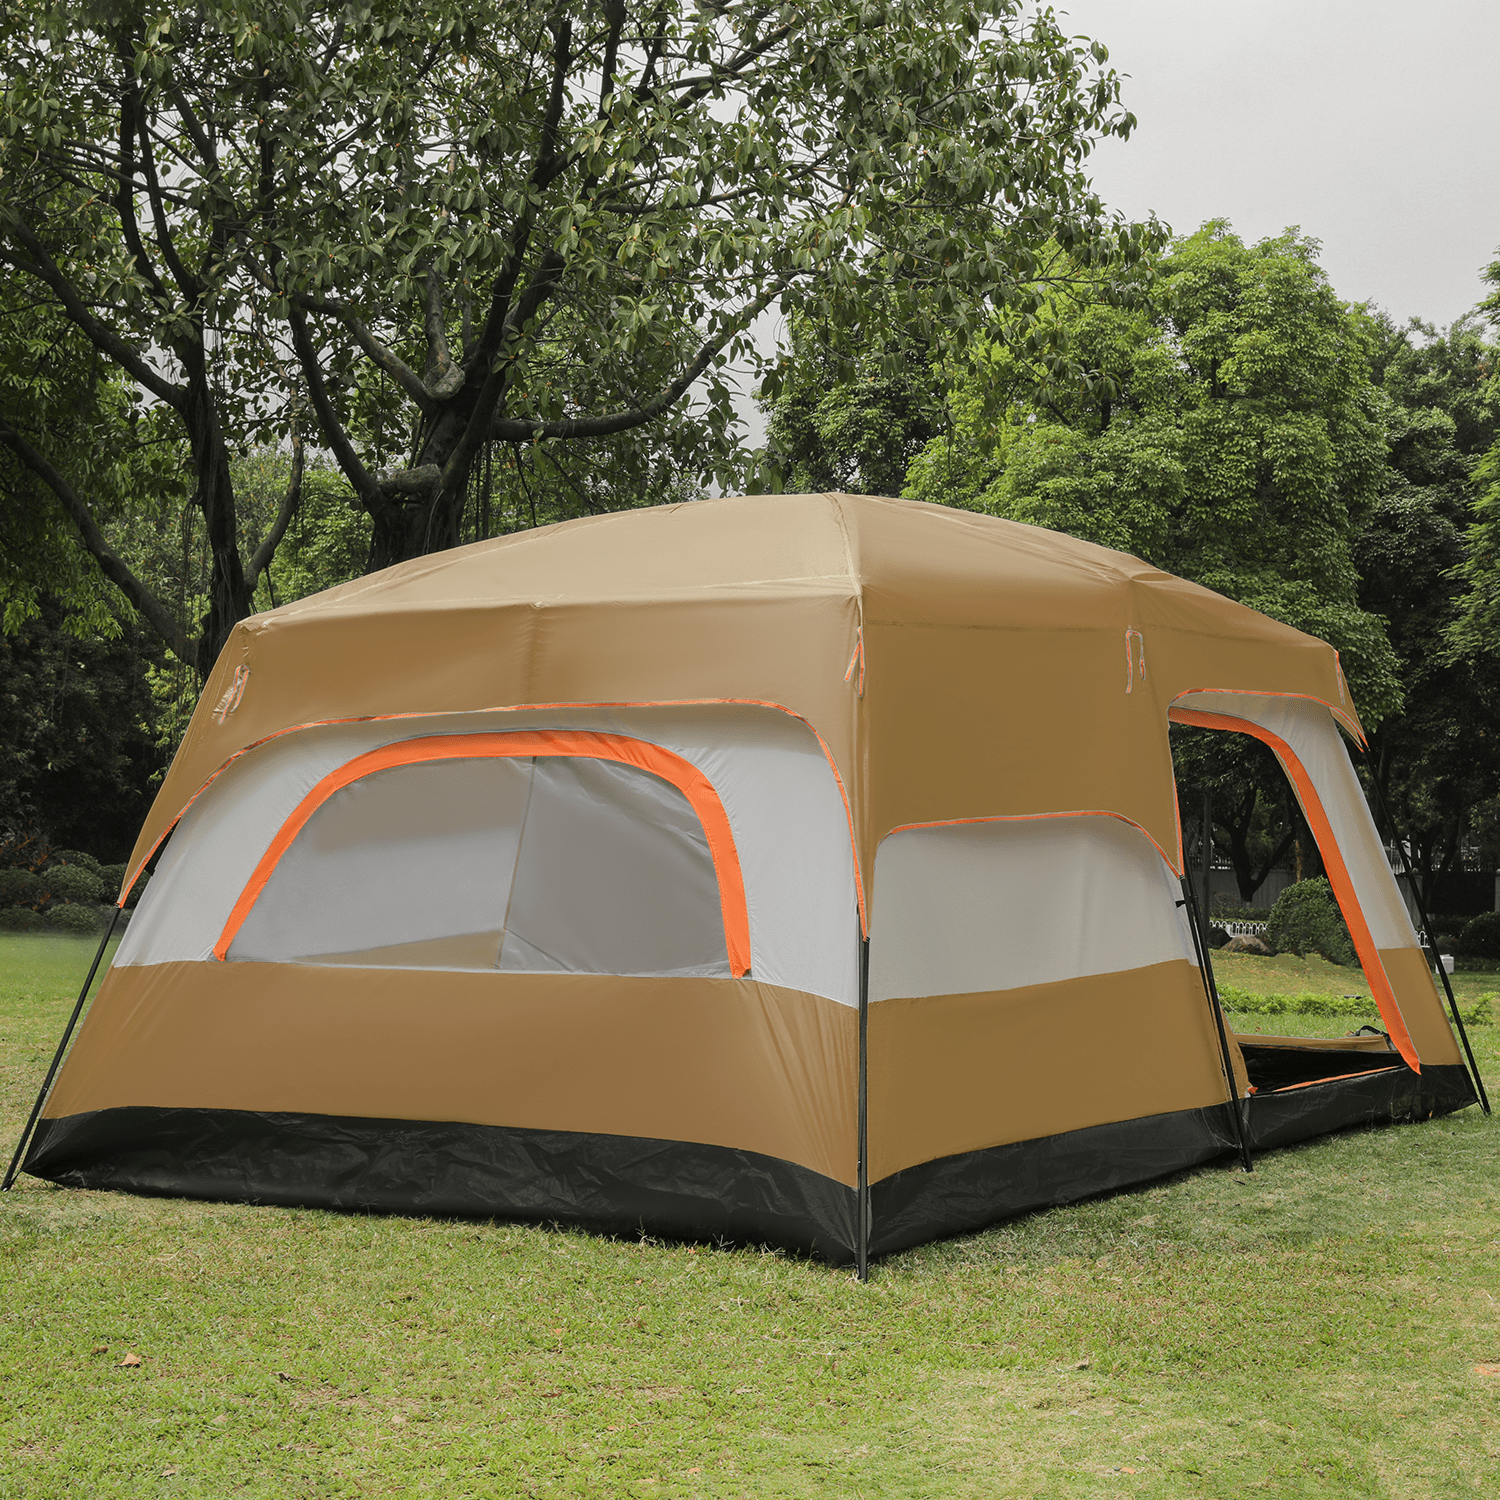 MoNiBloom Extra Large Tent 5-8 Person, Family Cabin Tents with 2